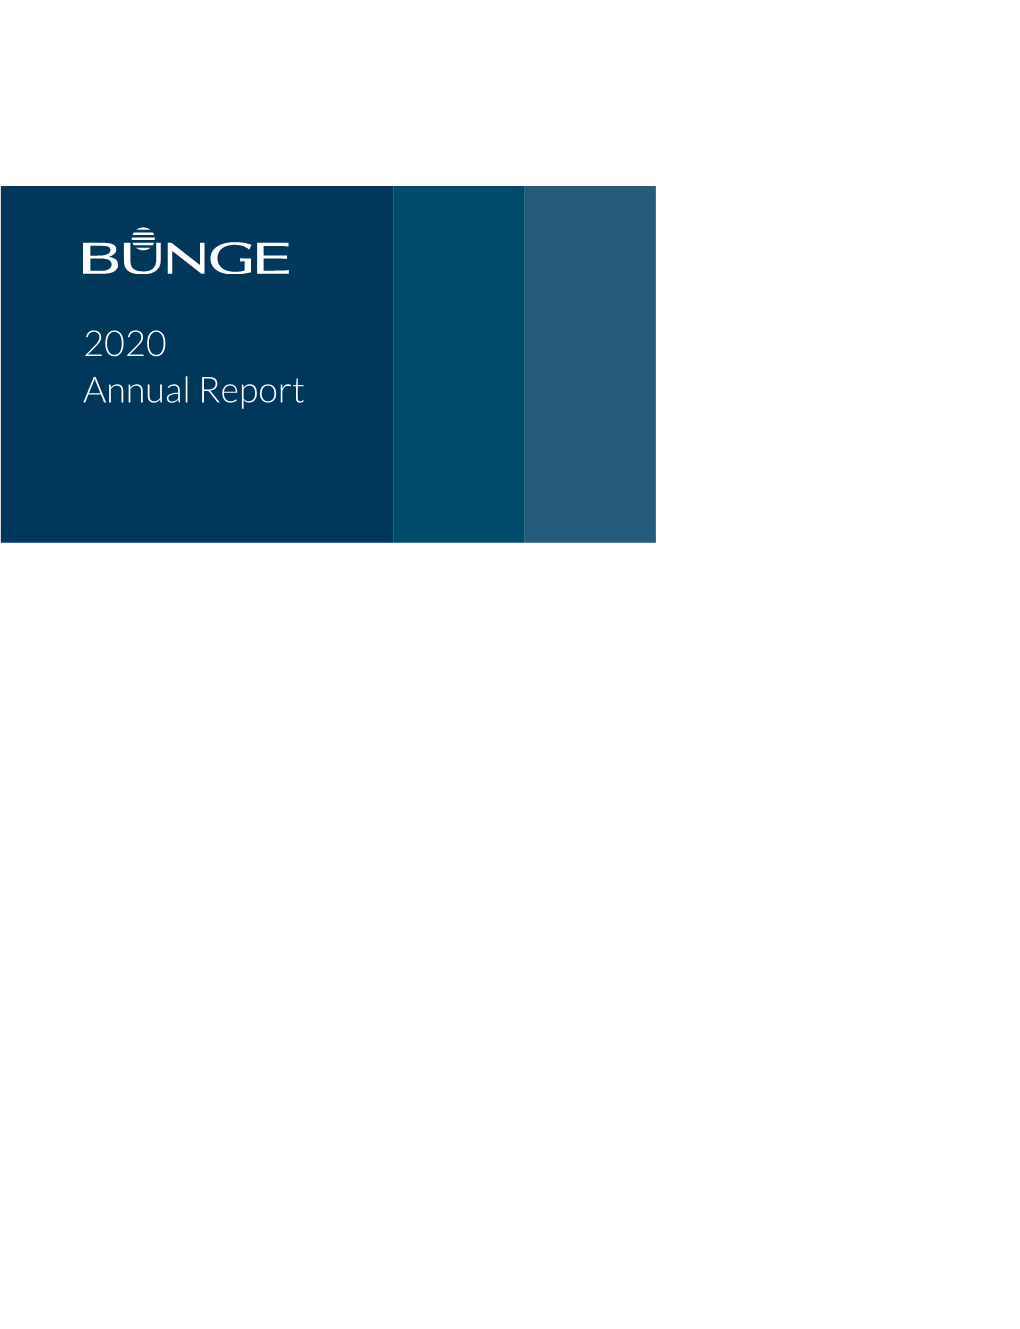 2020 Annual Report a Letter from Gregory Heckman, Bunge CEO